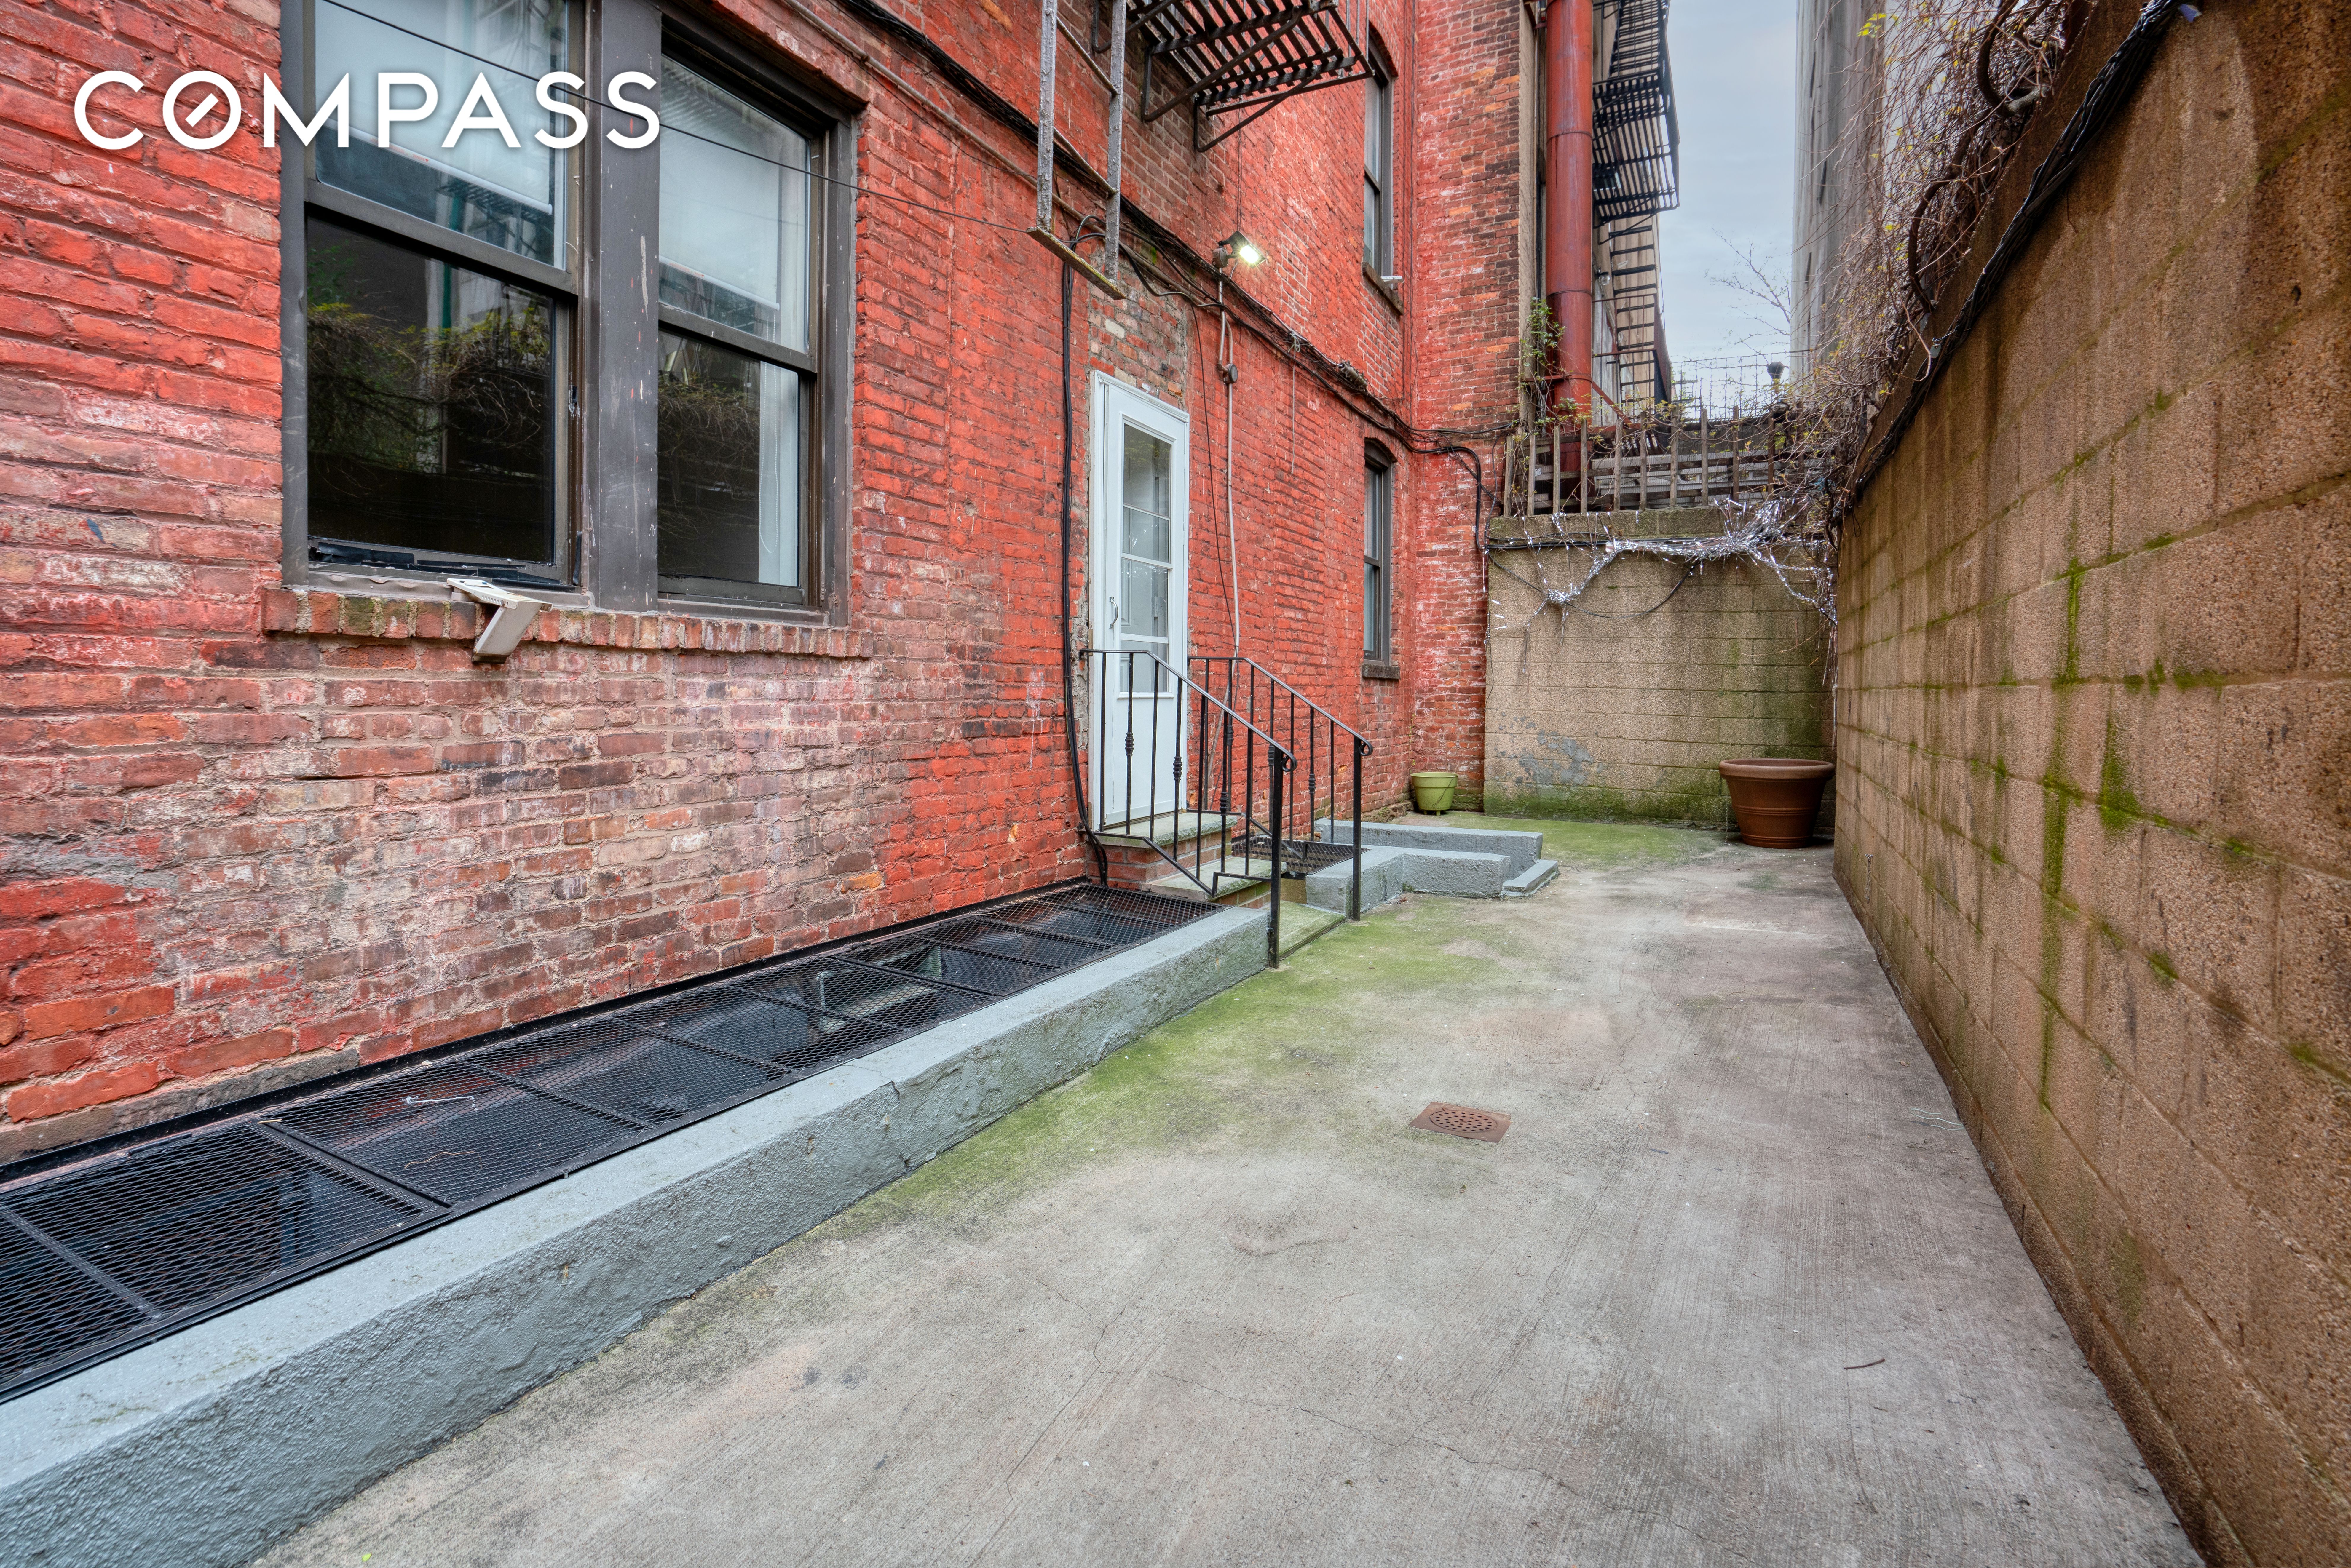 185 Ave C 1A, East Village, Downtown, NYC - 2 Bedrooms  

3 Rooms - 